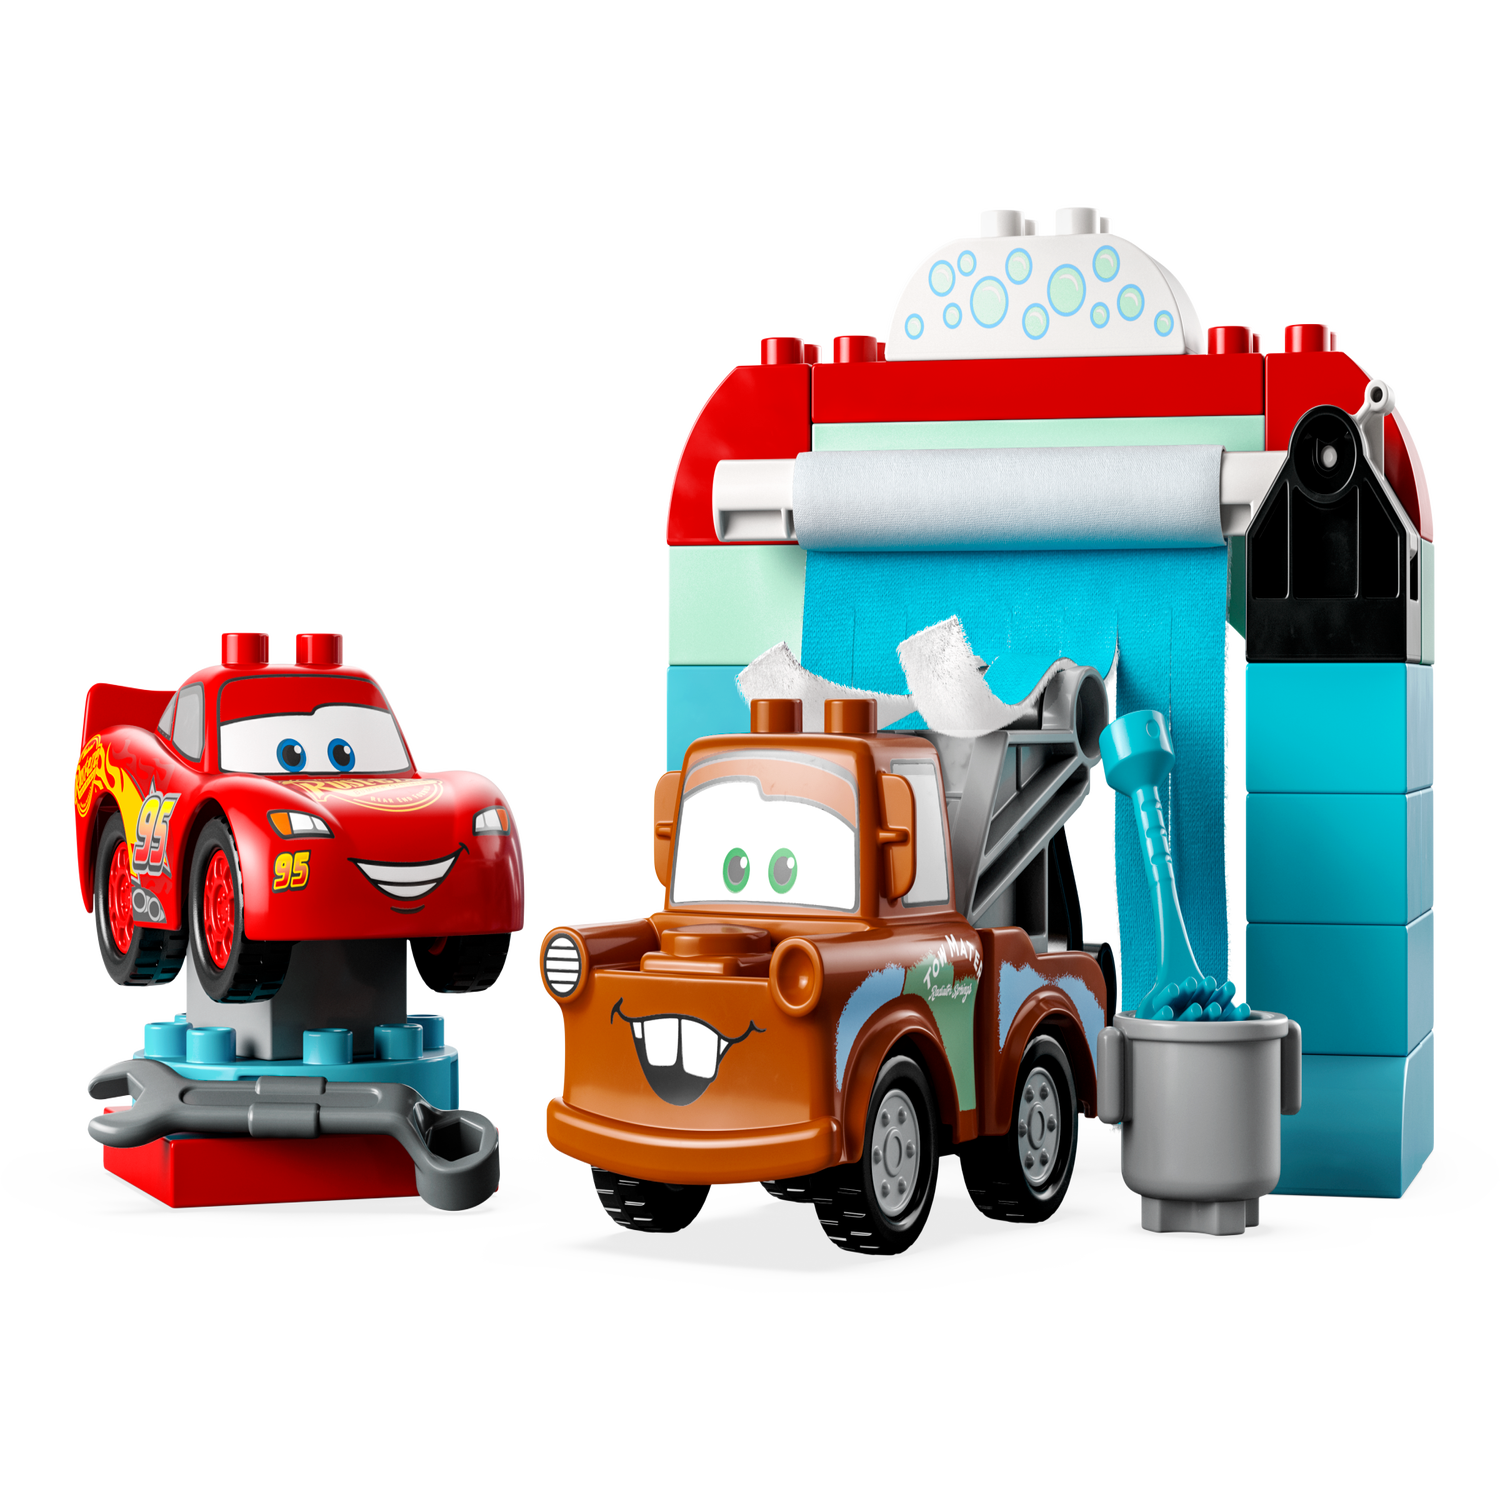 Disney Cars Toys: Find Lightning McQueen, Mater and More